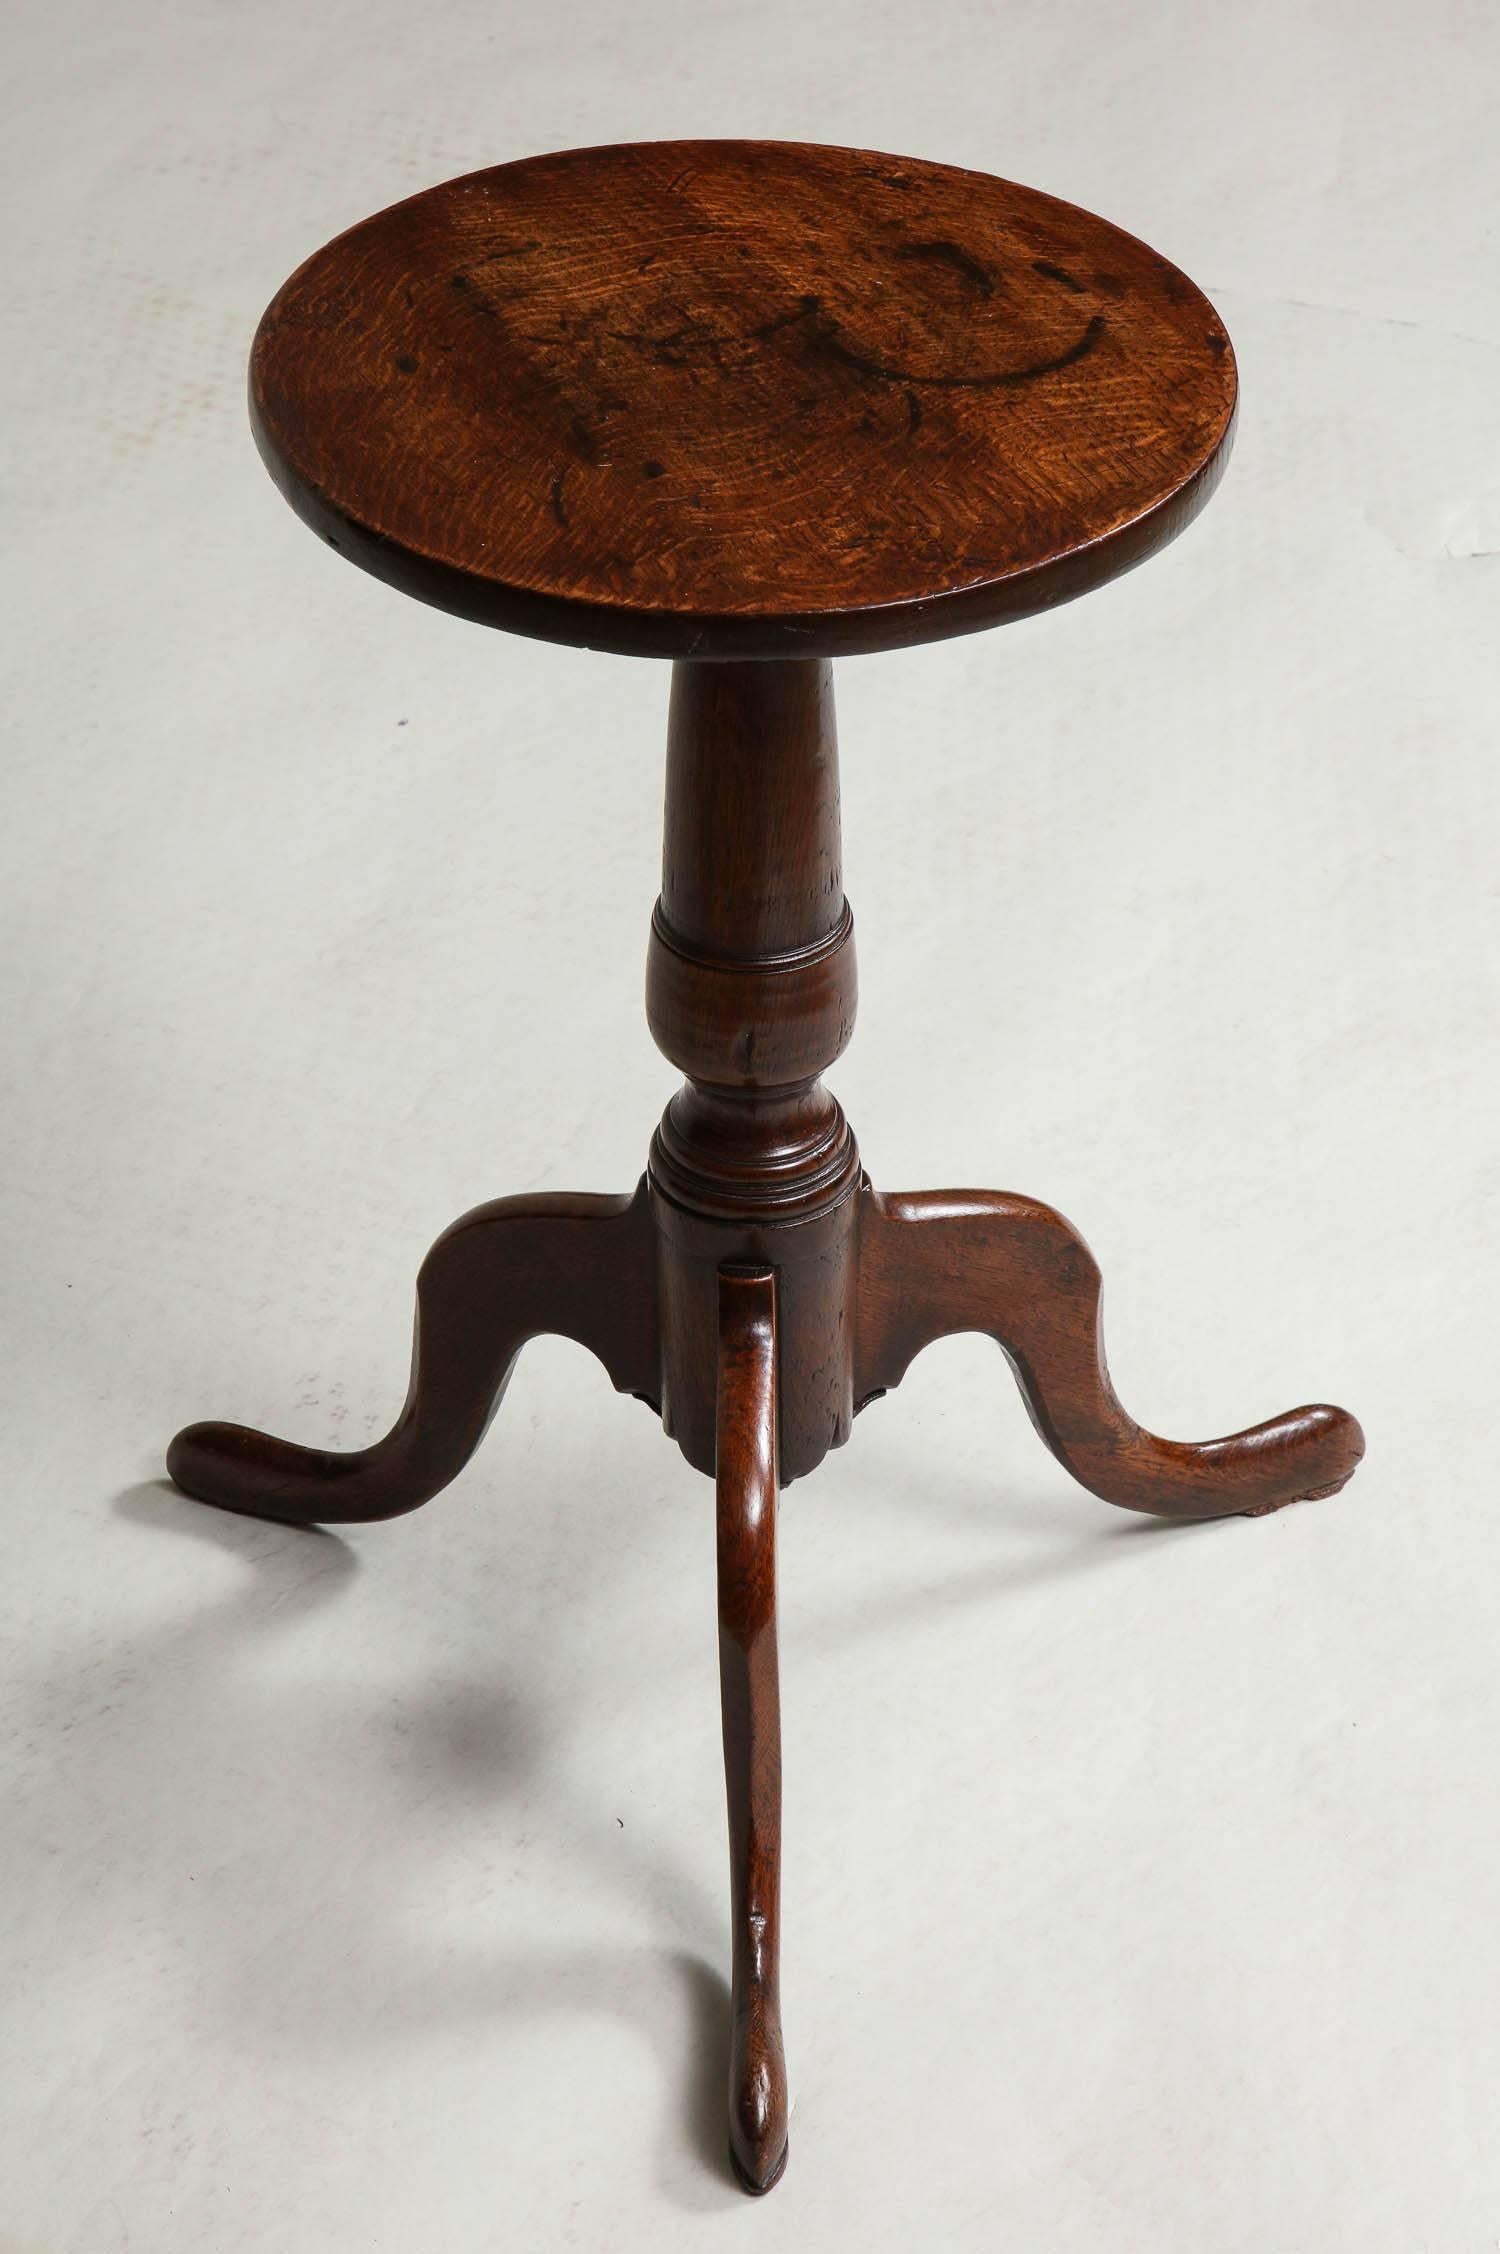 Fine 18th century English oak wine table or kettle stand having circular top with simple bullnose edge over boldly turned shaft and standing on well formed cabriole legs ending in slipper feet.